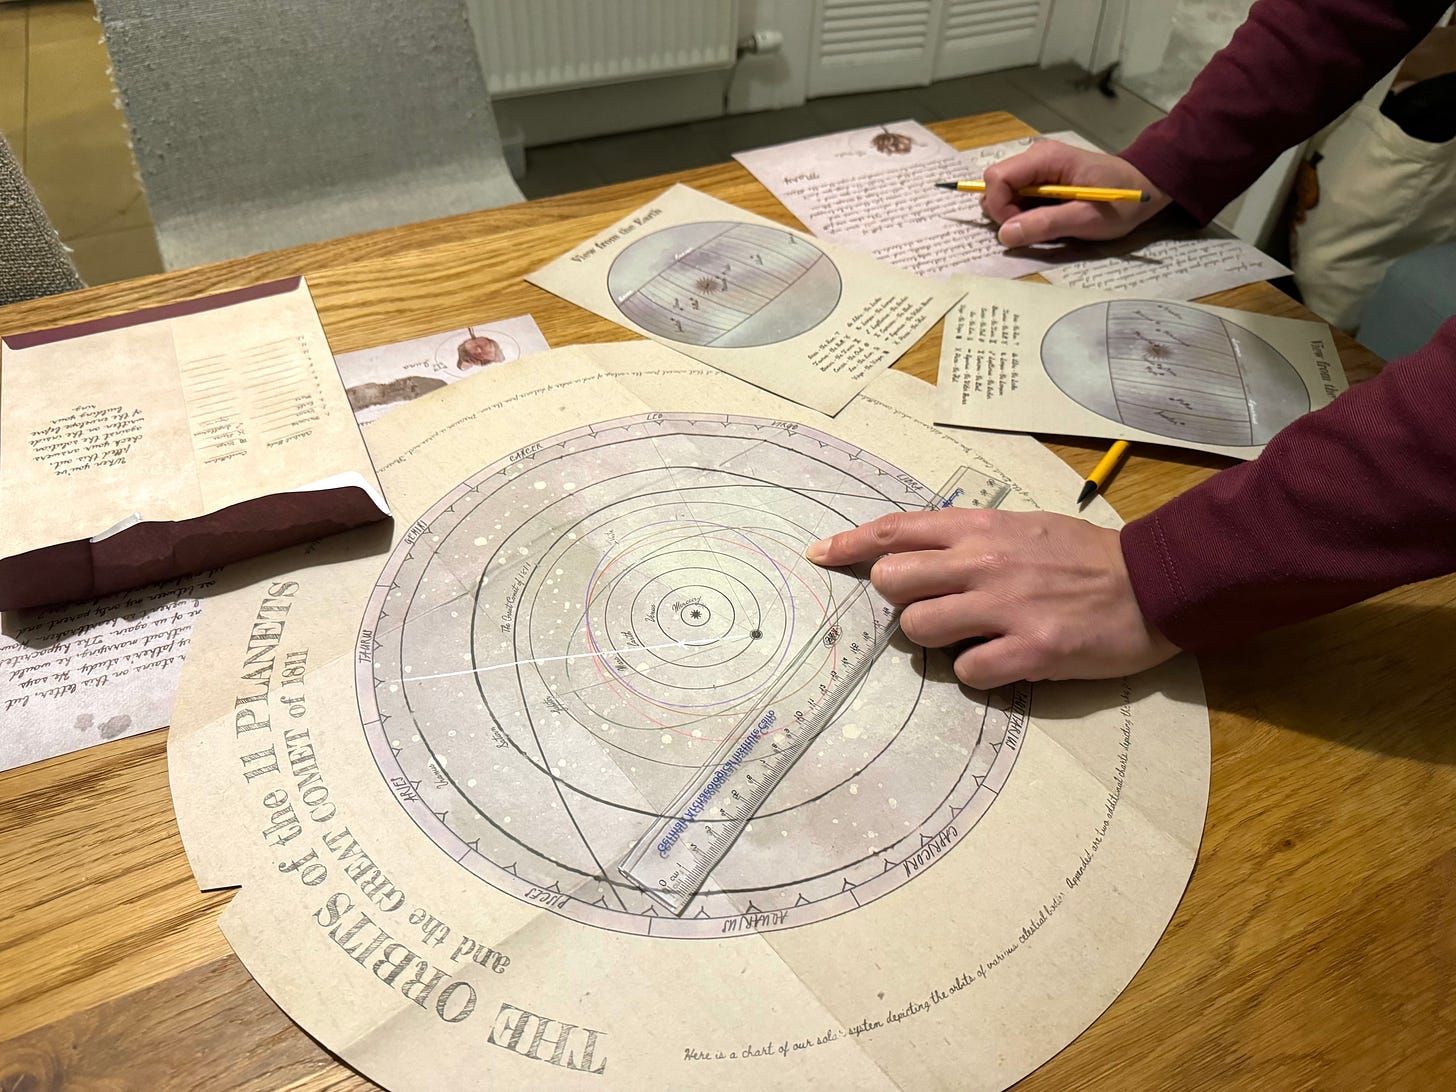 A hand points at a printed circular map of the solar system on a table